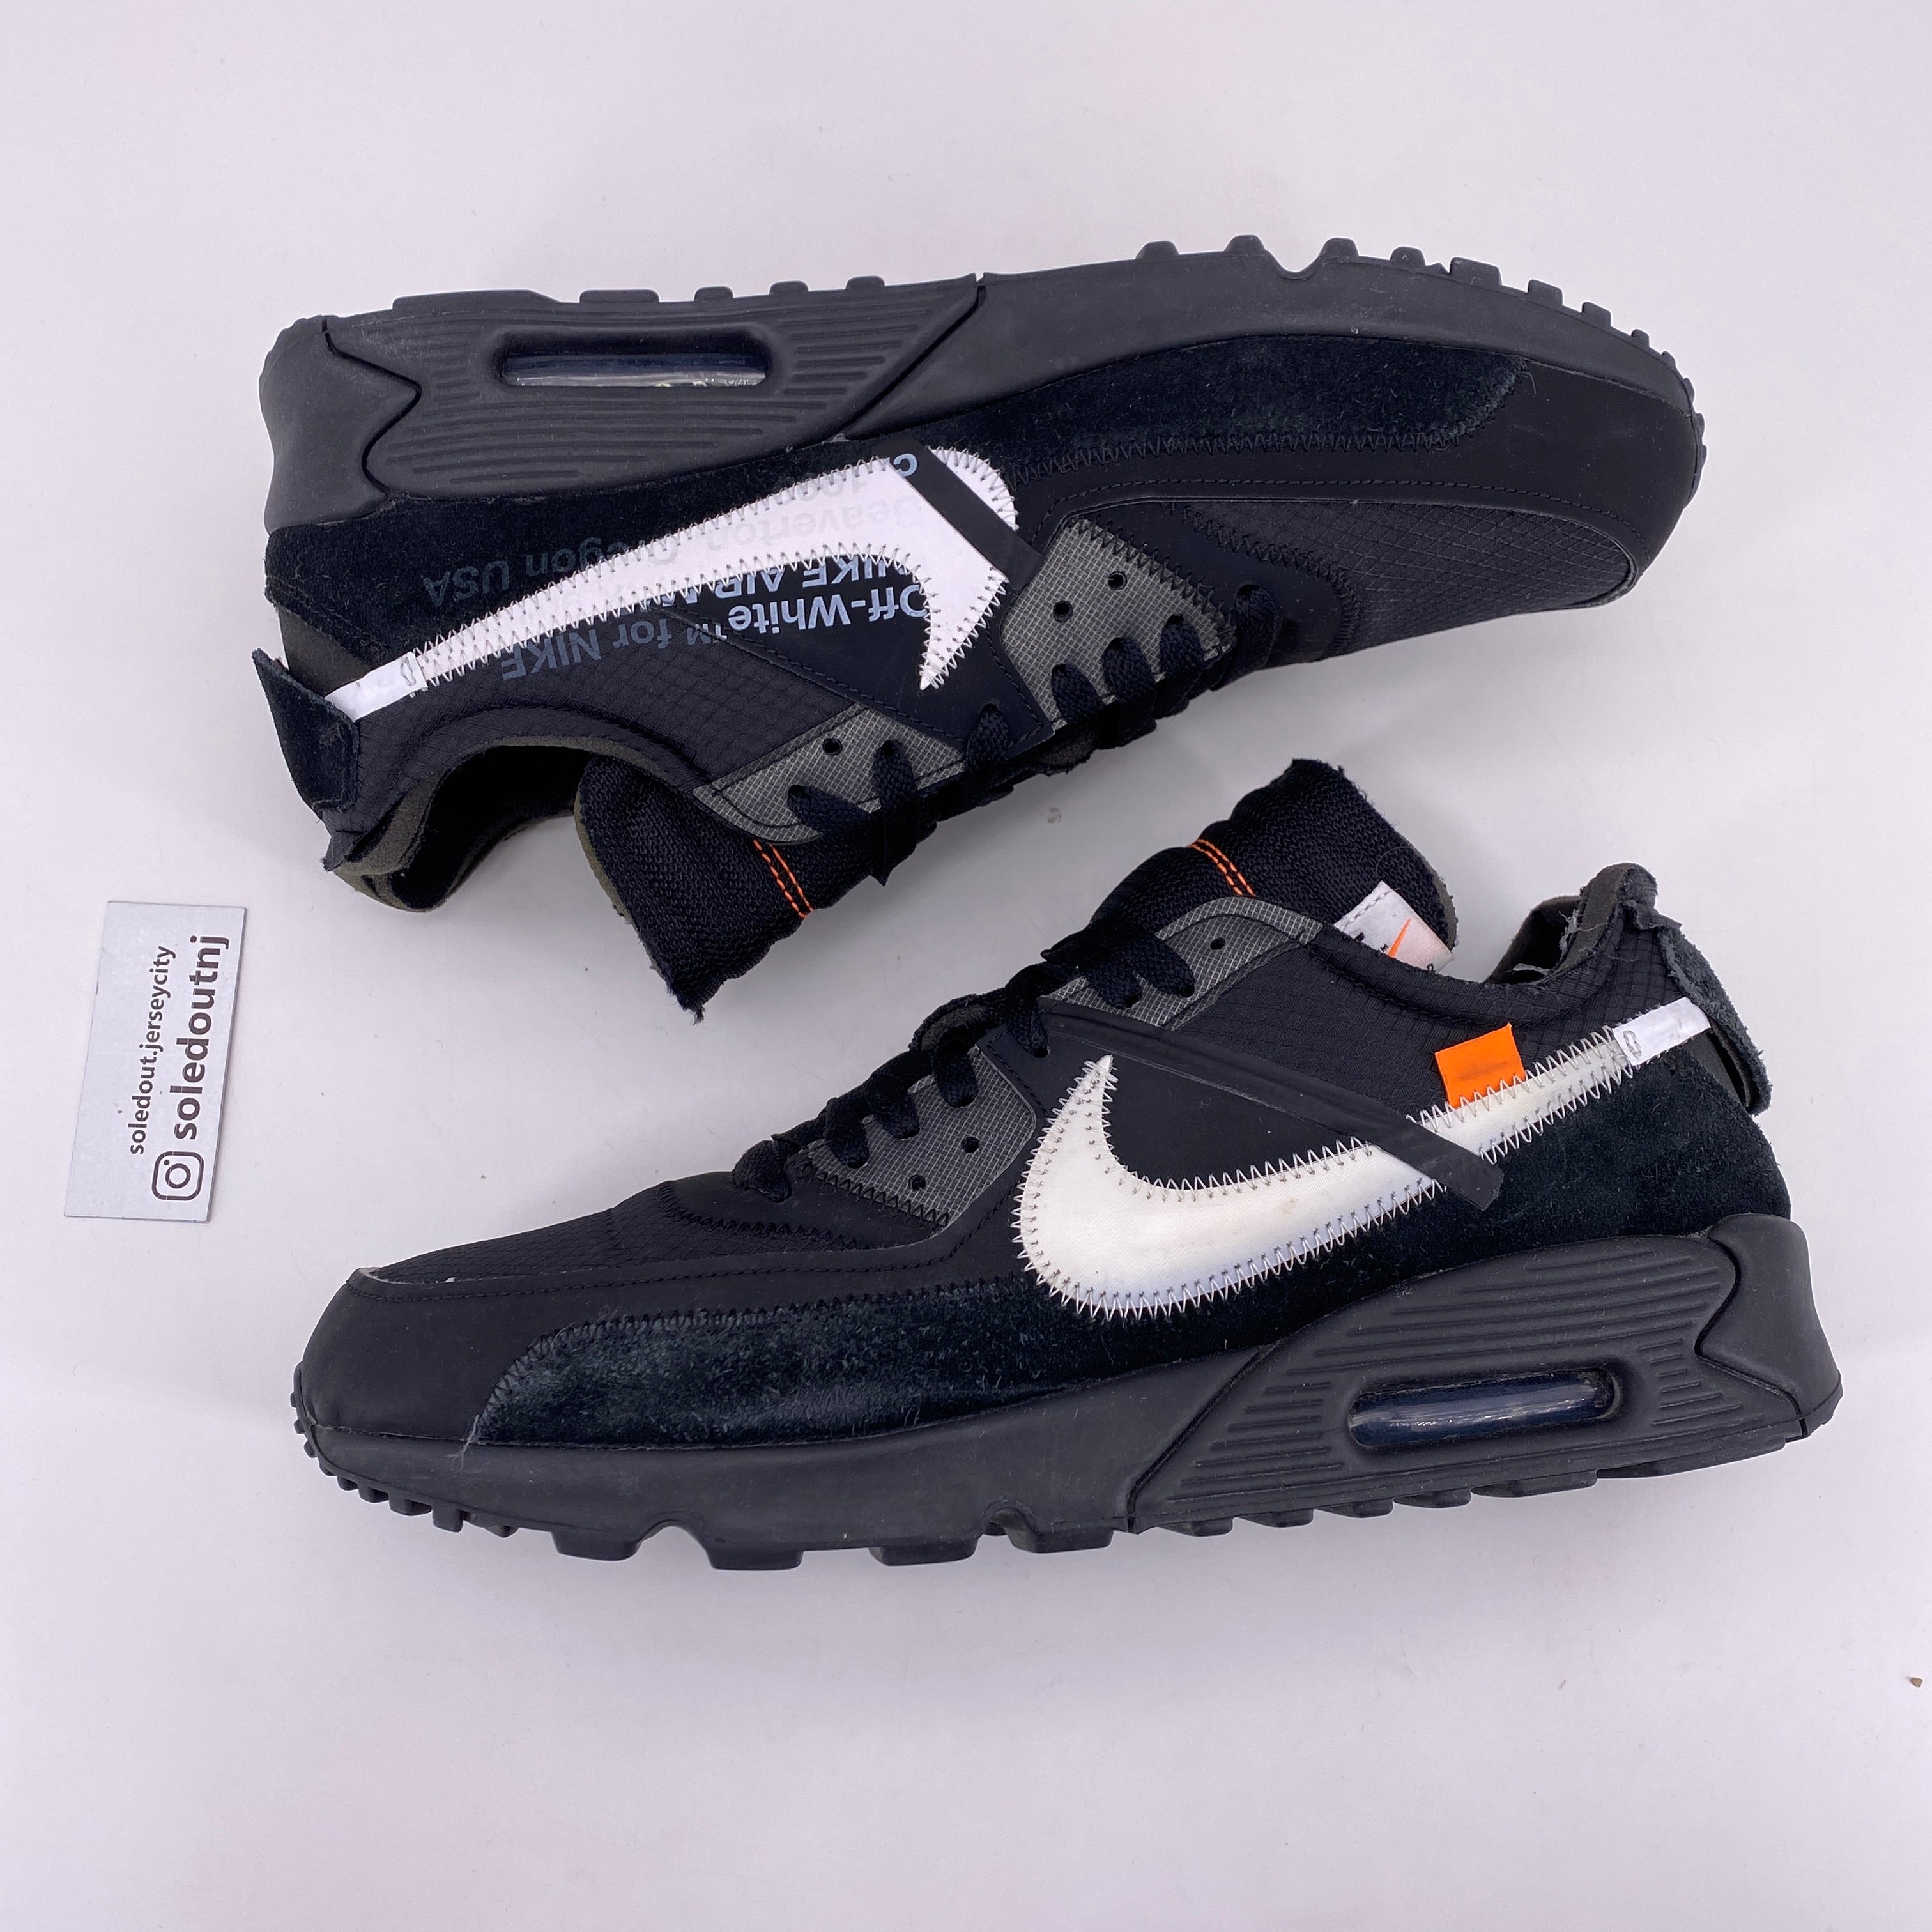 Nike Air Max 90 &quot;Ow Black&quot; 2019 Used Size 12